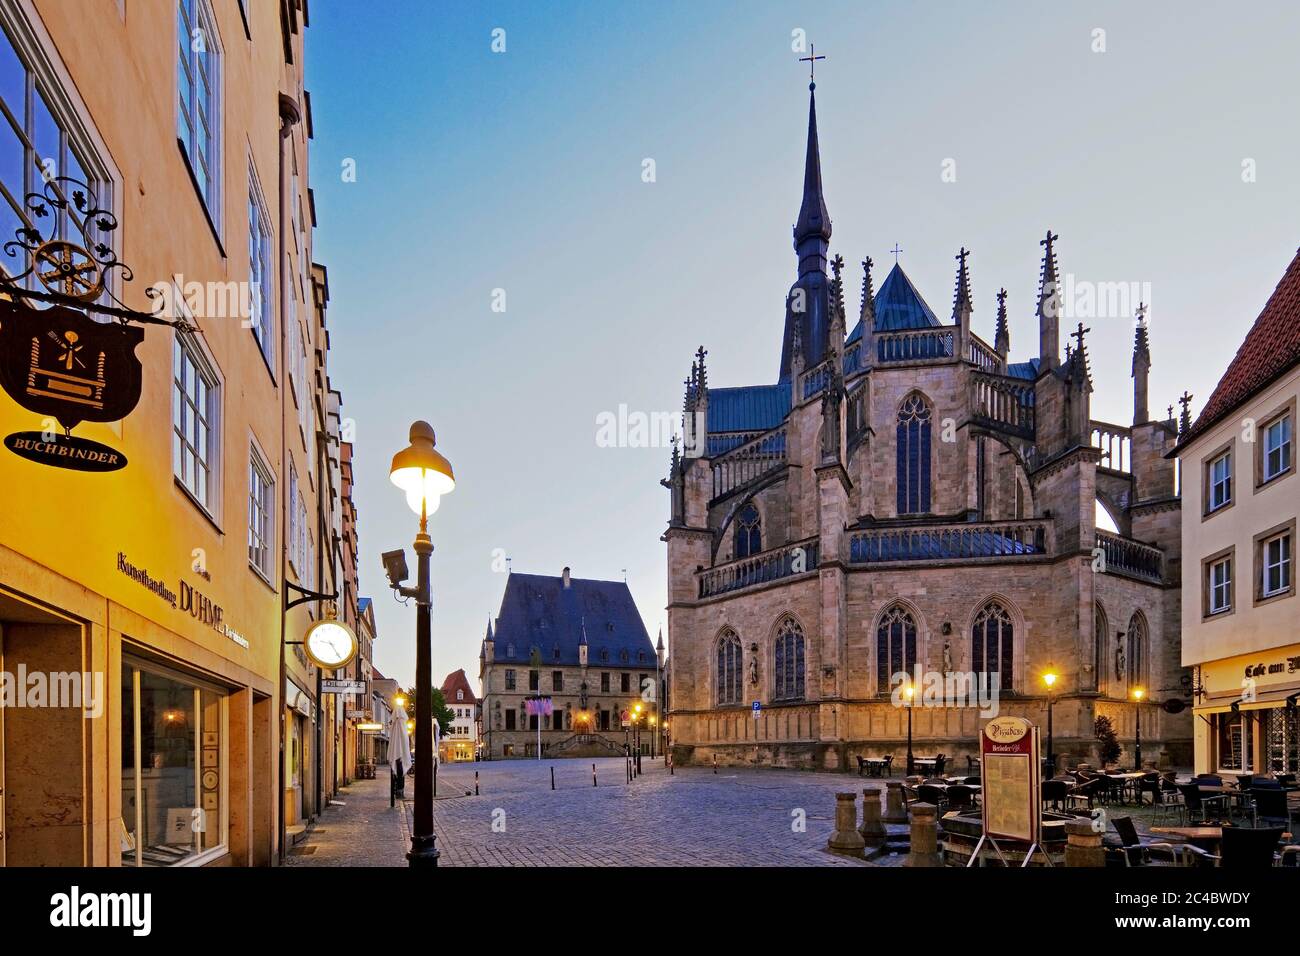 market square with St Marien Church and town hall of the Peace of Westphalia, Germany, Lower Saxony, Osnabrueck Stock Photo